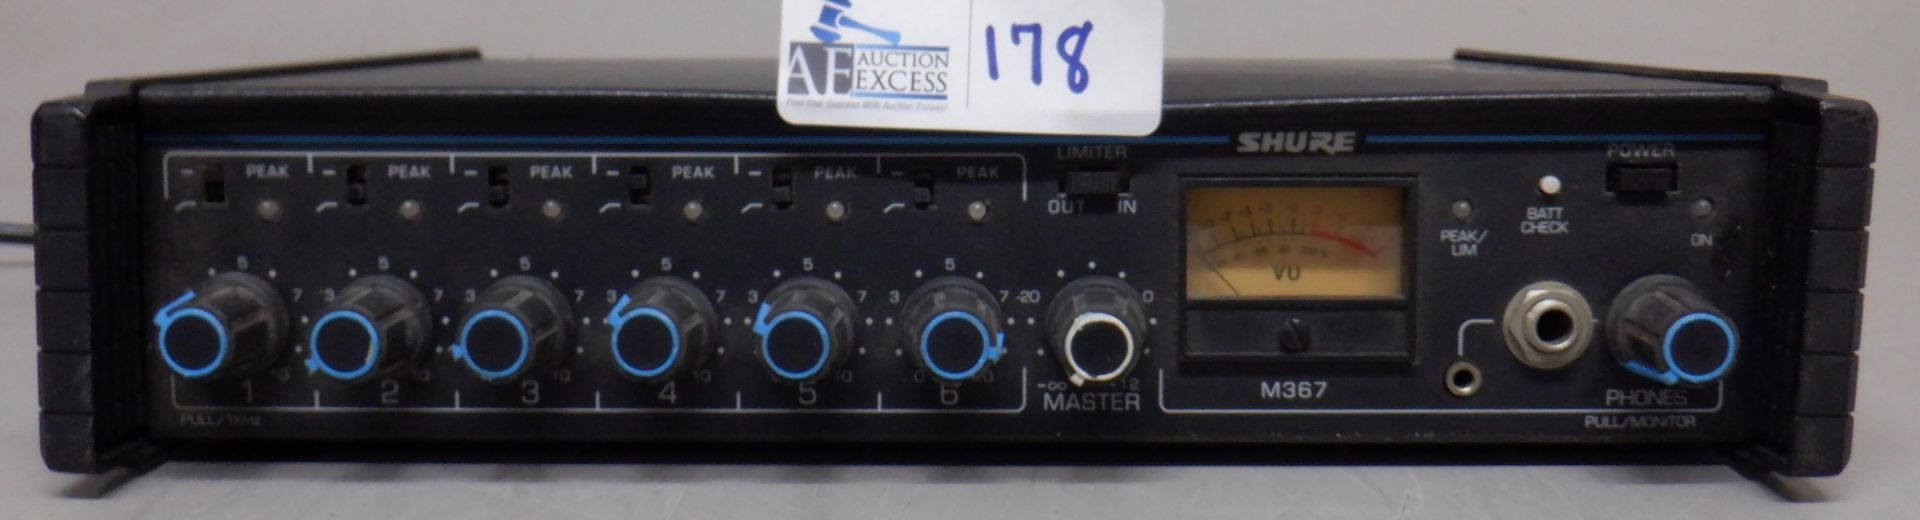 SHURE M367 6 CHANNEL MIC MIXER